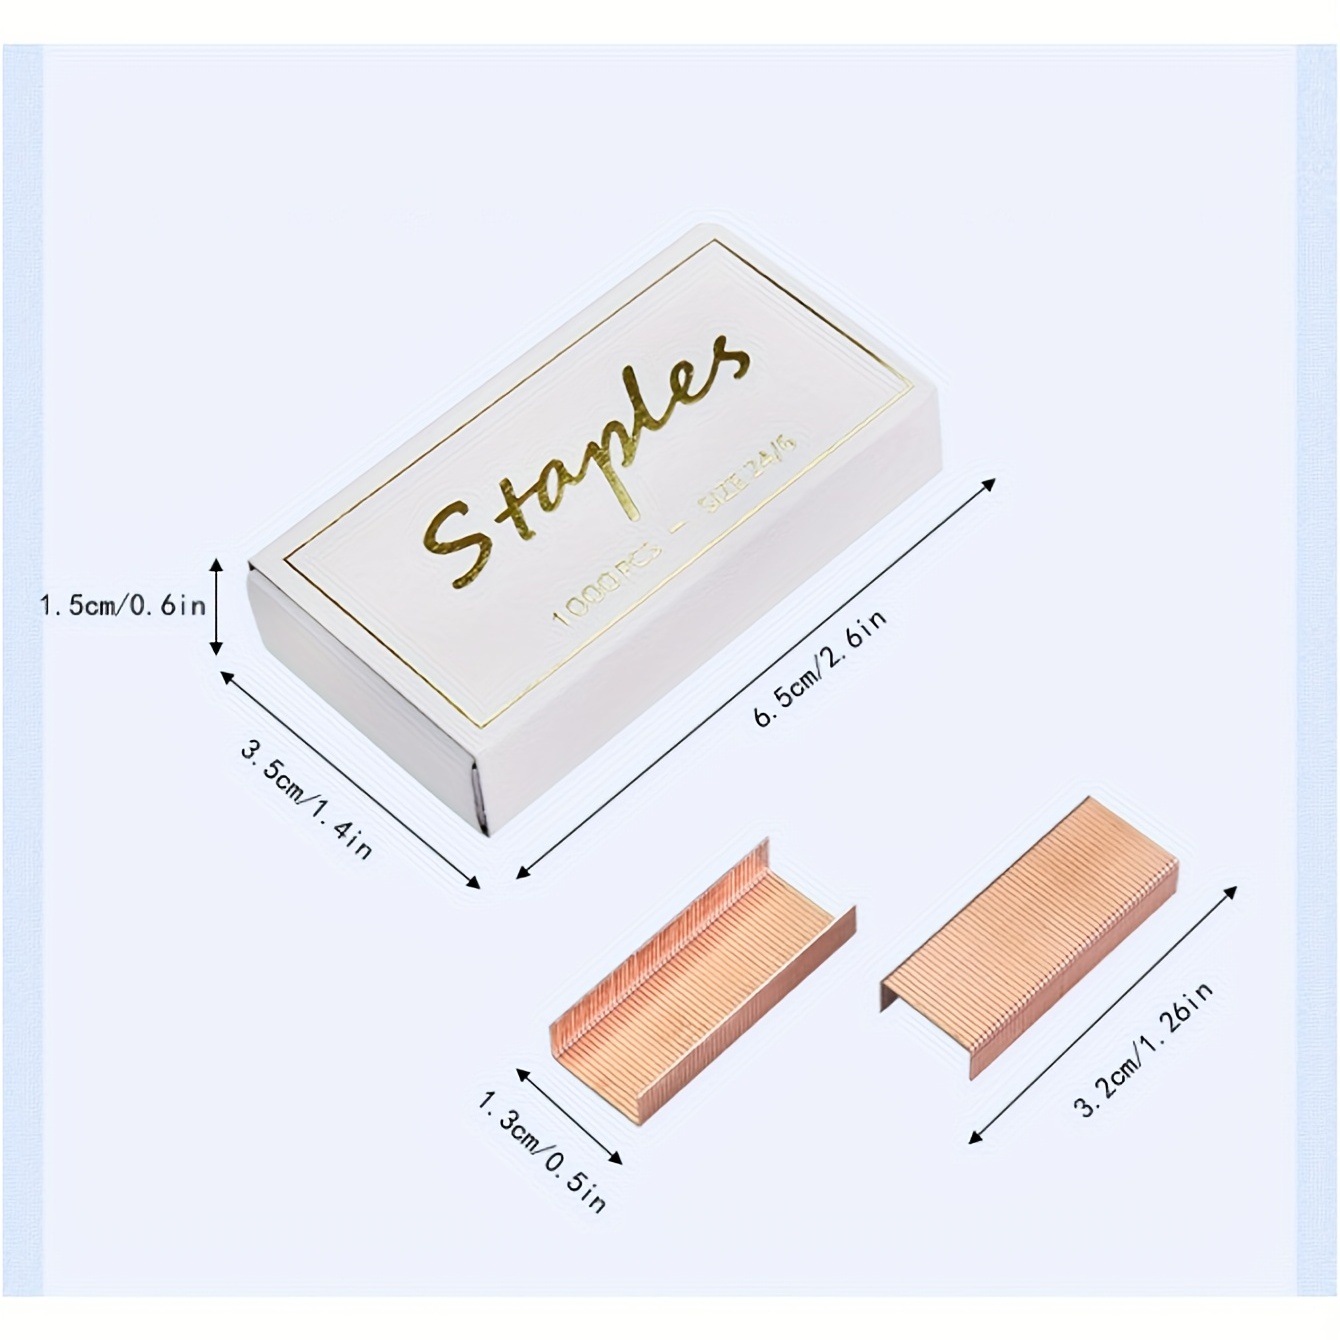 Rose Gold Staples Metal Creative Staple for Staplers Trend Office  Accessories 26/6 Stationery Supplies